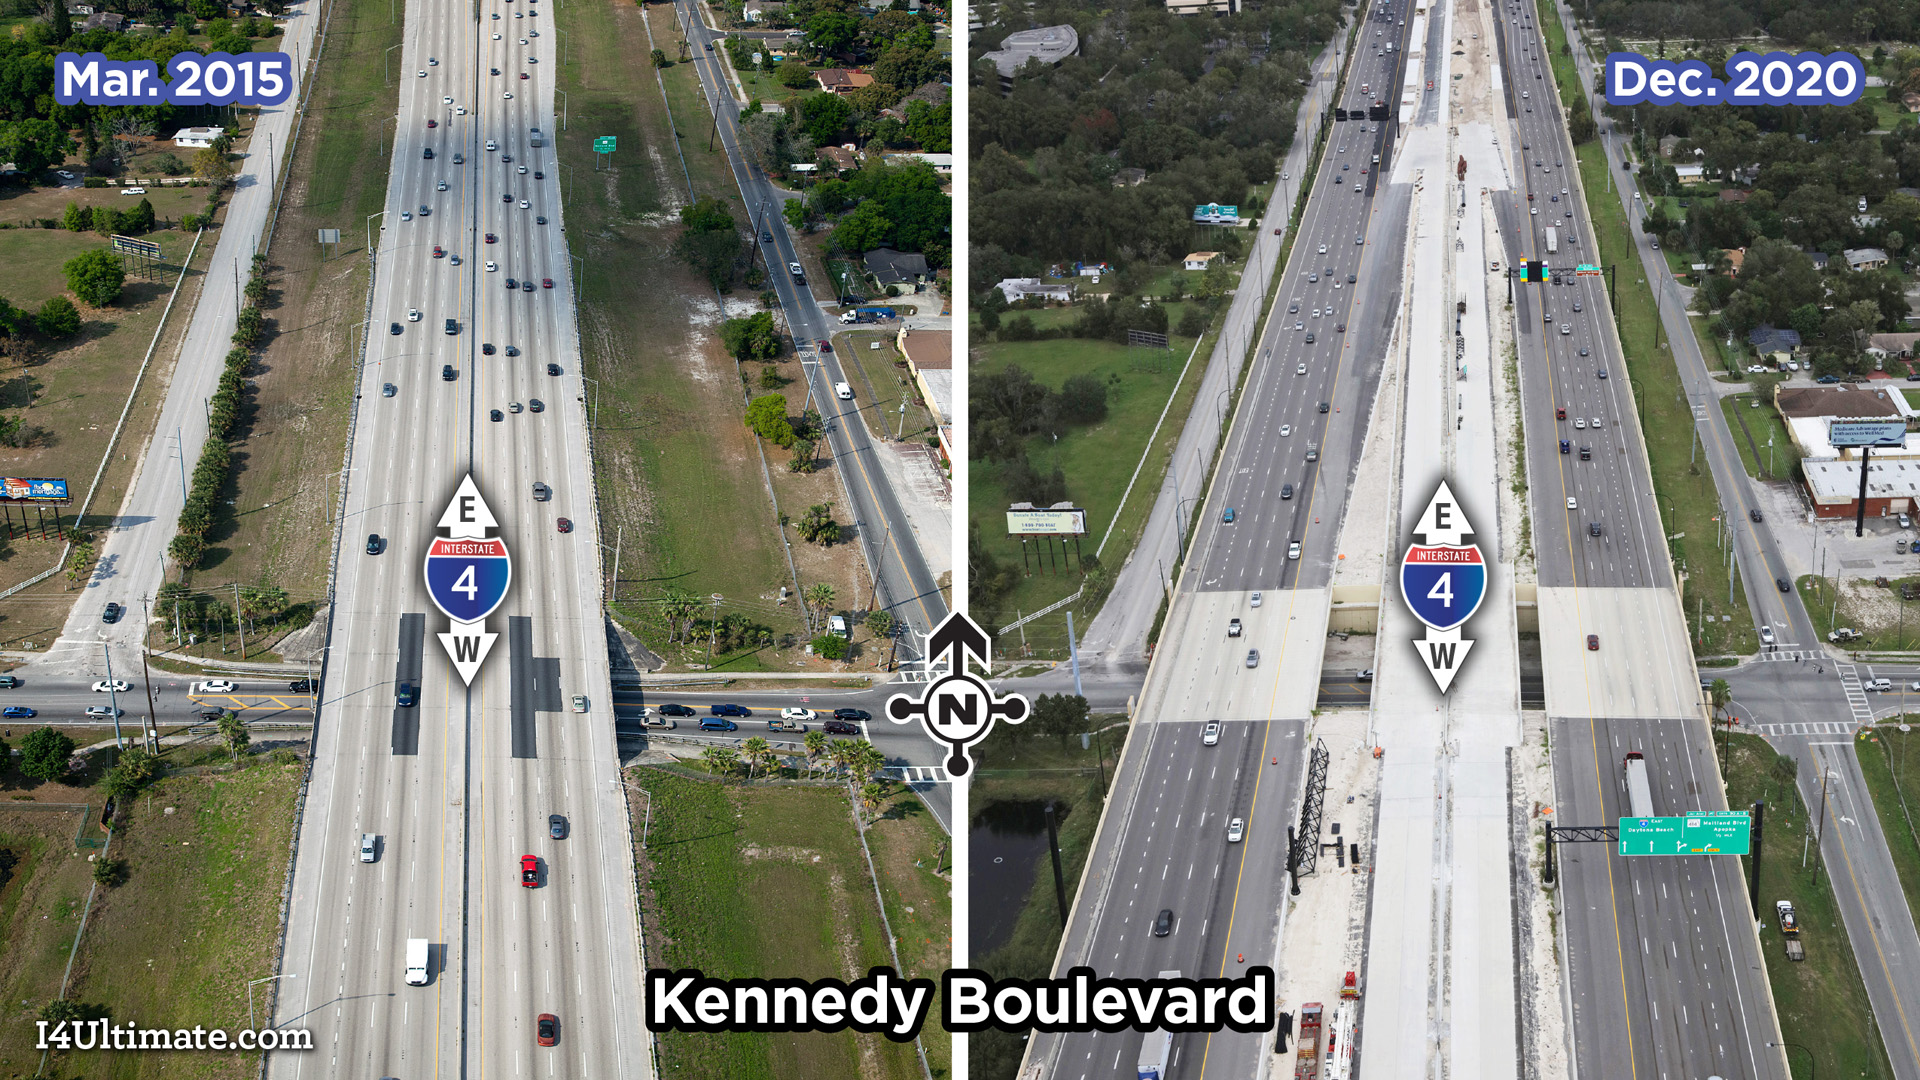 4738-I4Ultimate-GUL-campaign-images-20210212-18-Kennedy-Boulevard